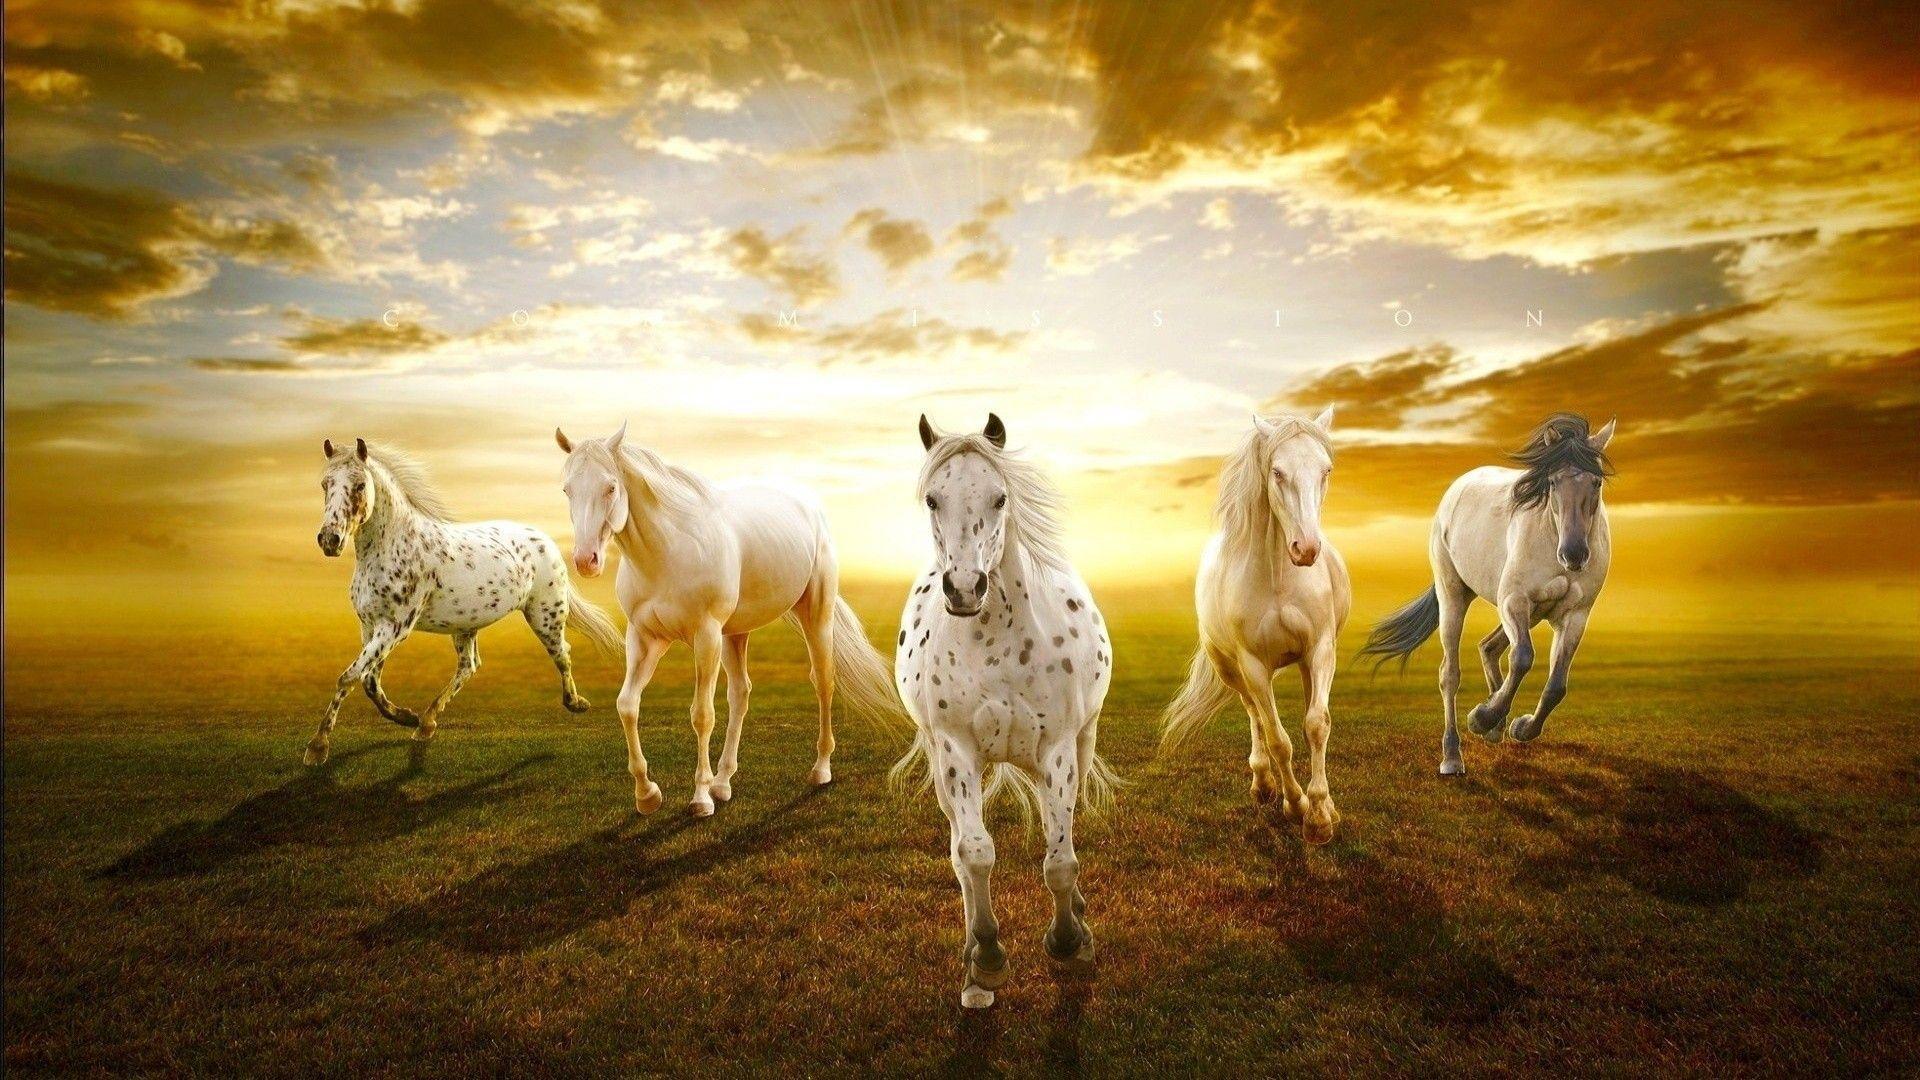 Seven Horses Wallpaper For Android Apk